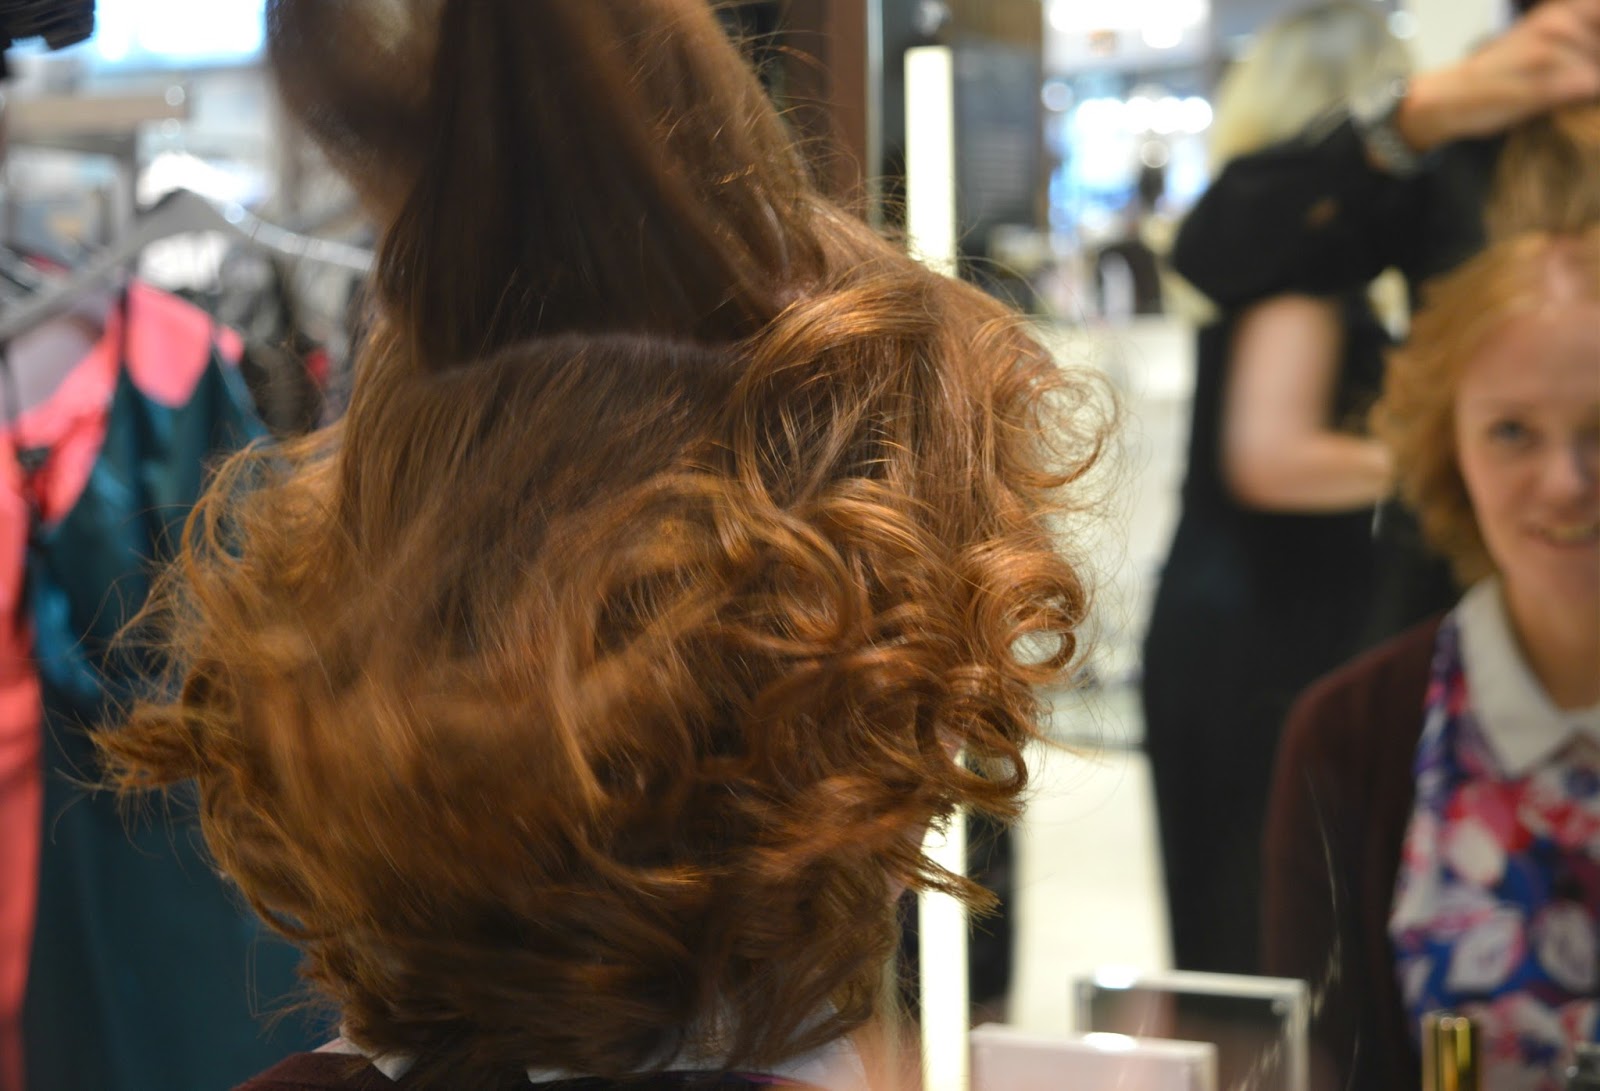 Show Dry Bar at House of Fraser, Metrocentre